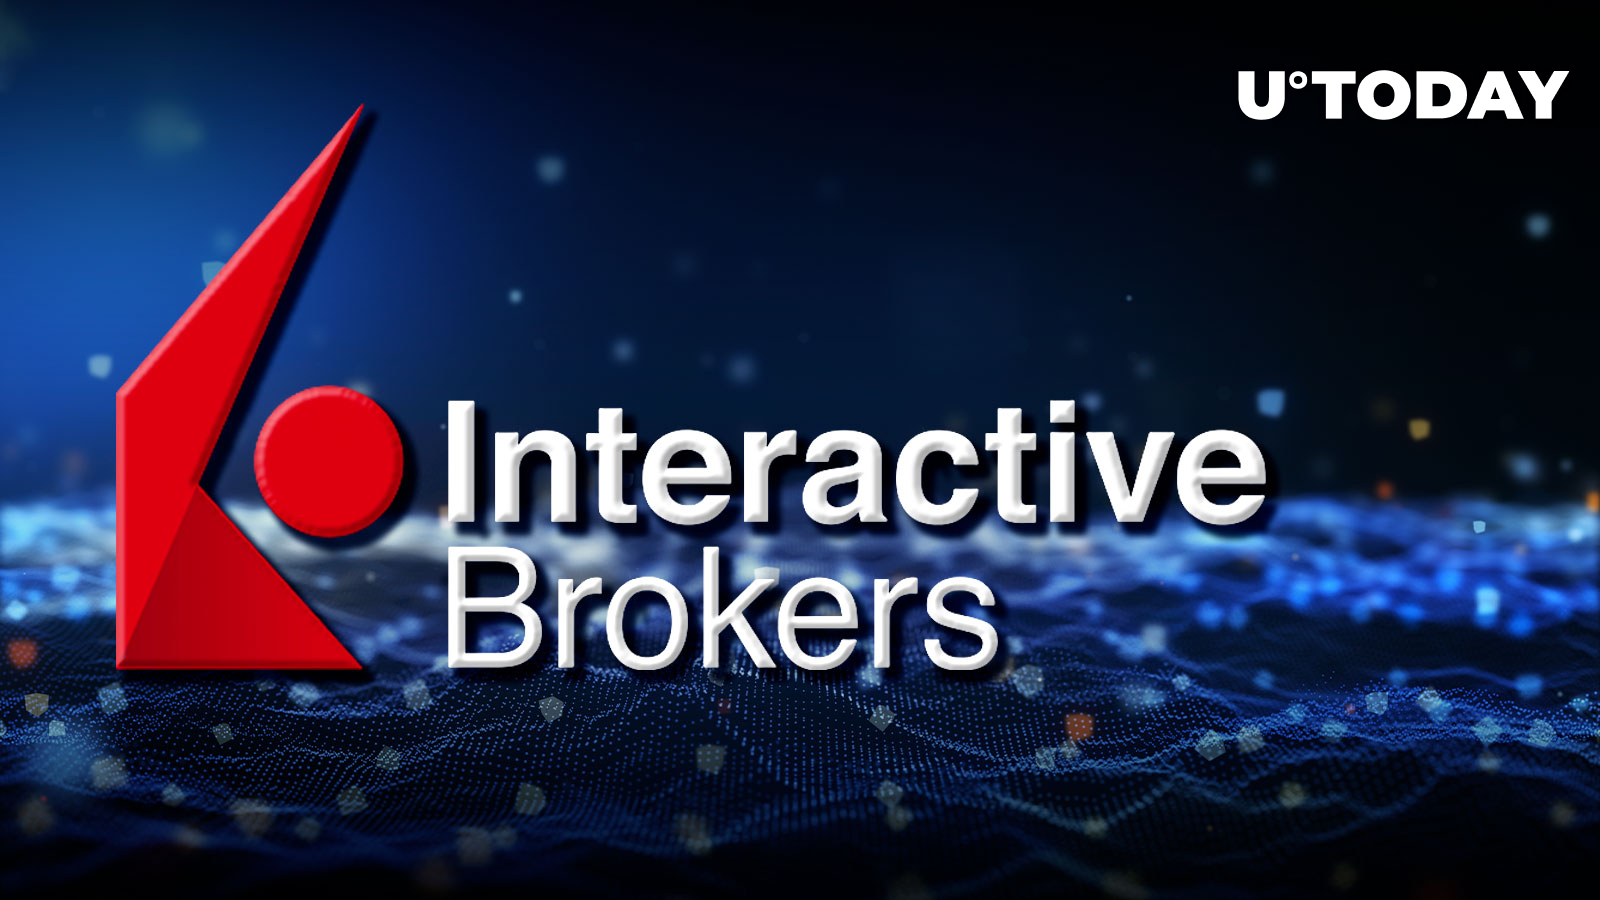 Brokerage Giant Interactive Brokers Dives Deeper into Crypto